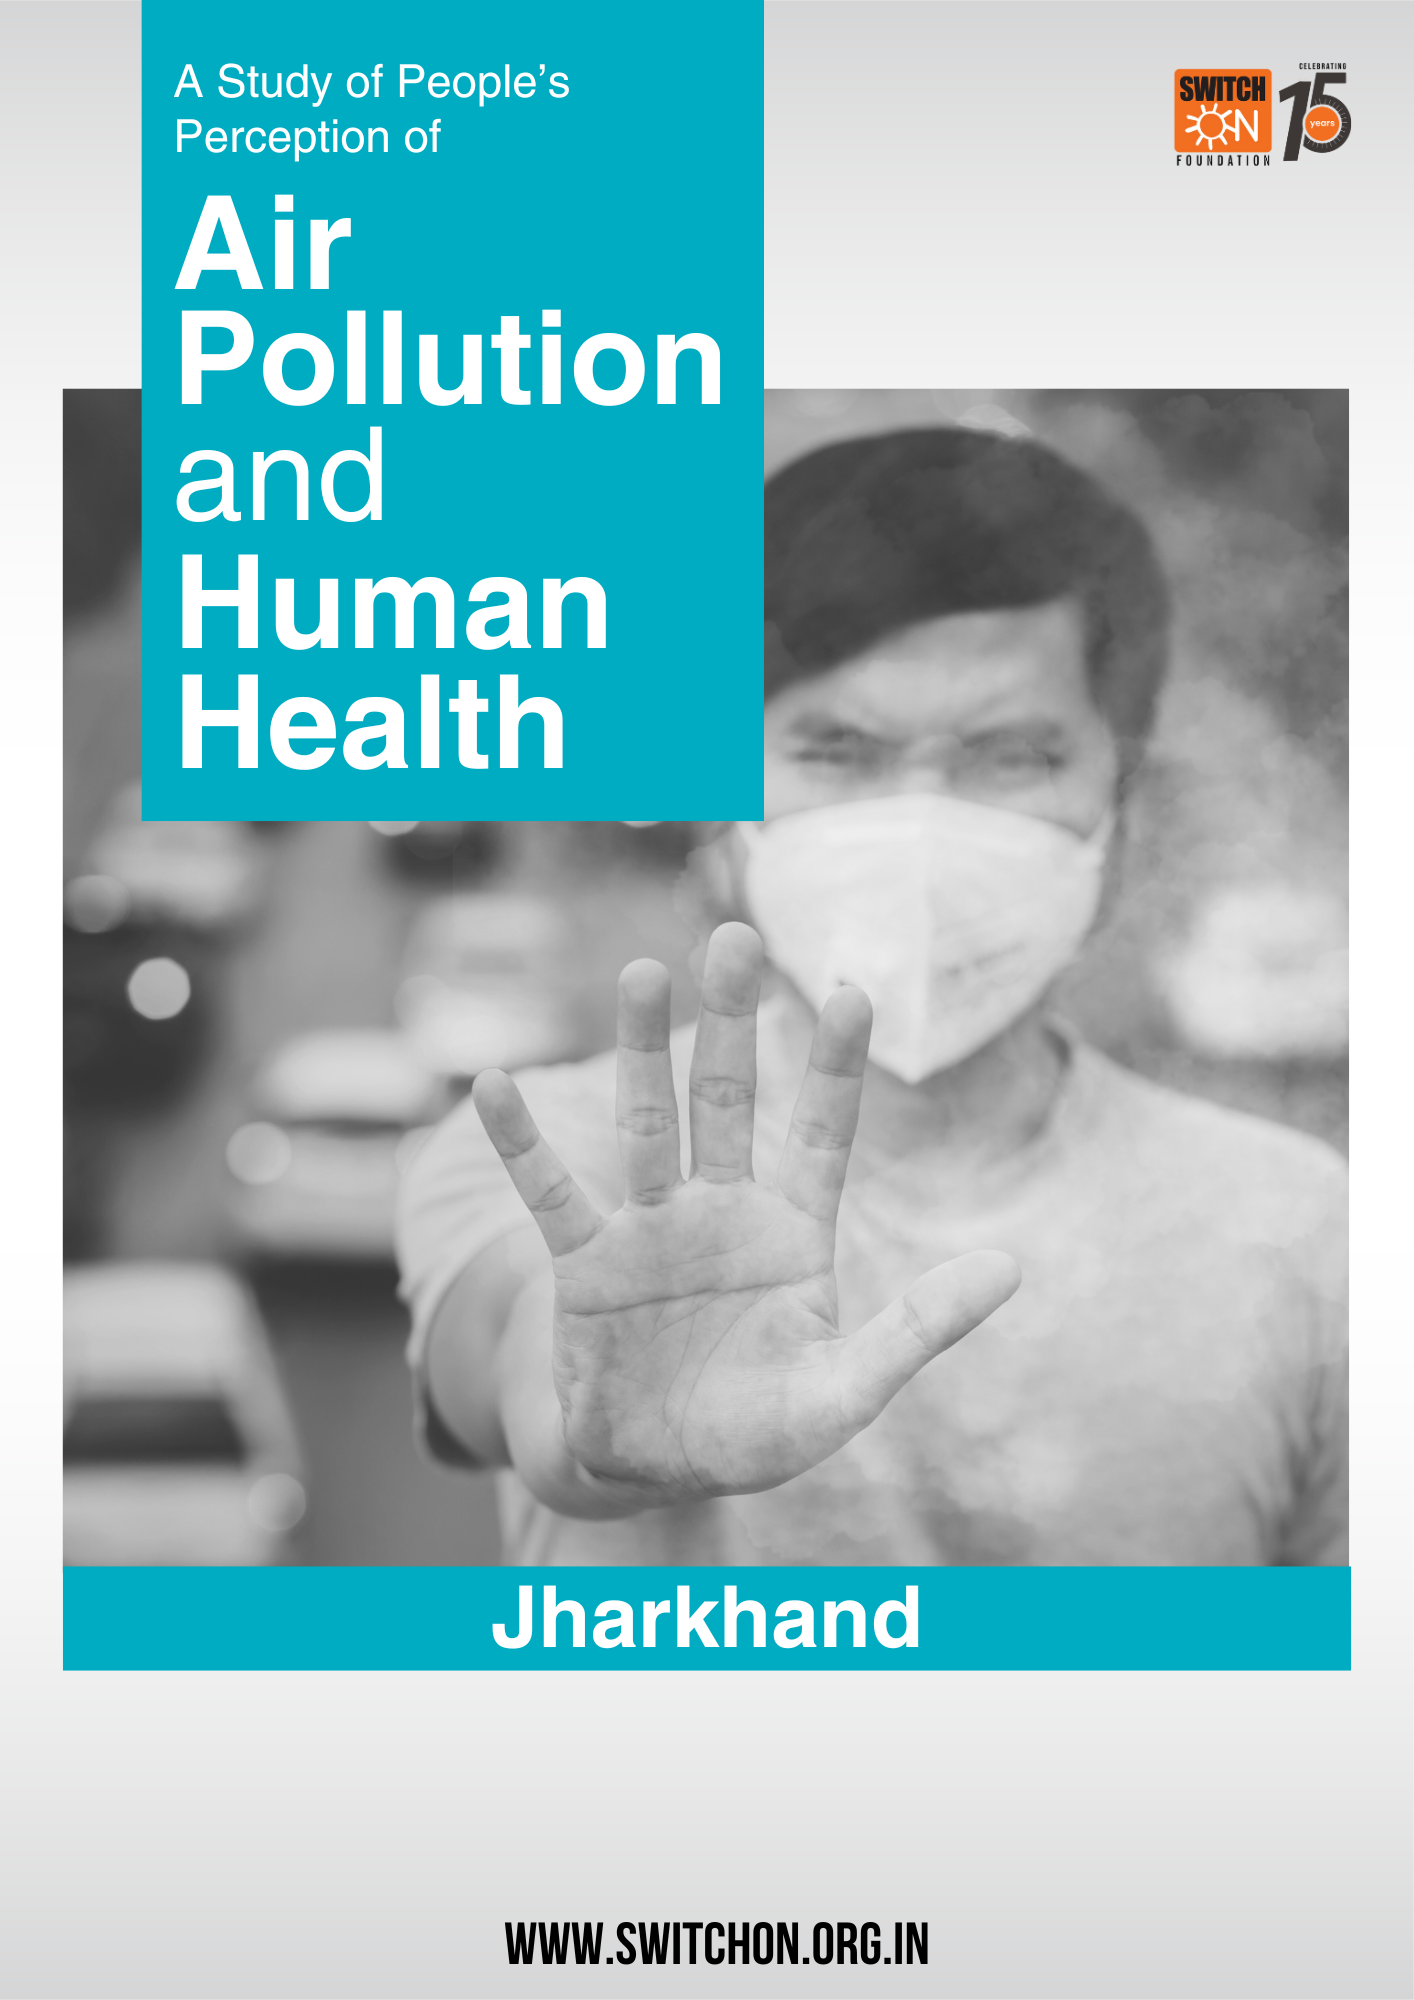 A Perception Study of Air Pollution & Human Health | Jharkhand Report